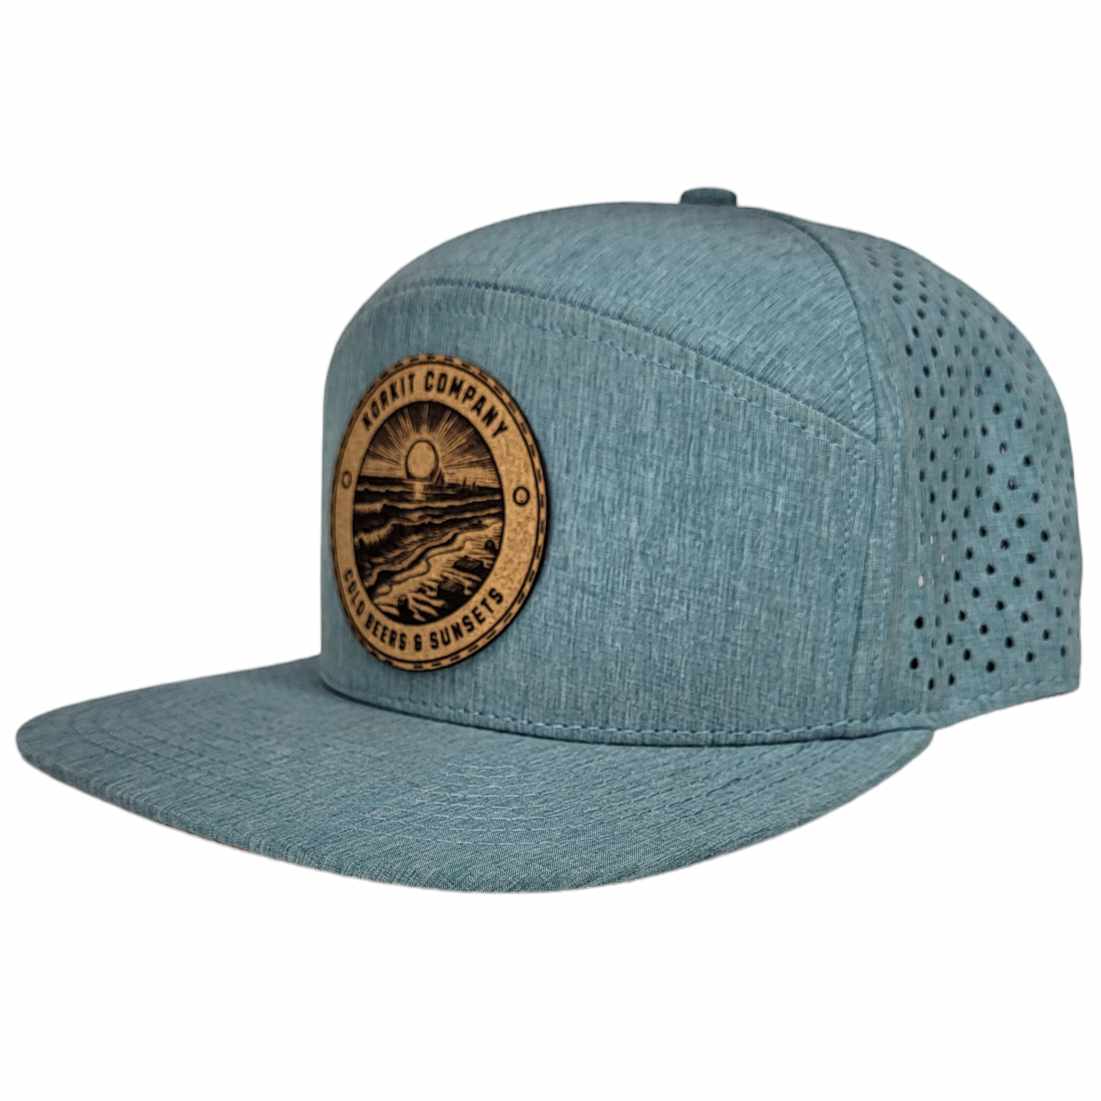 Cold Beers & Sunsets Hat